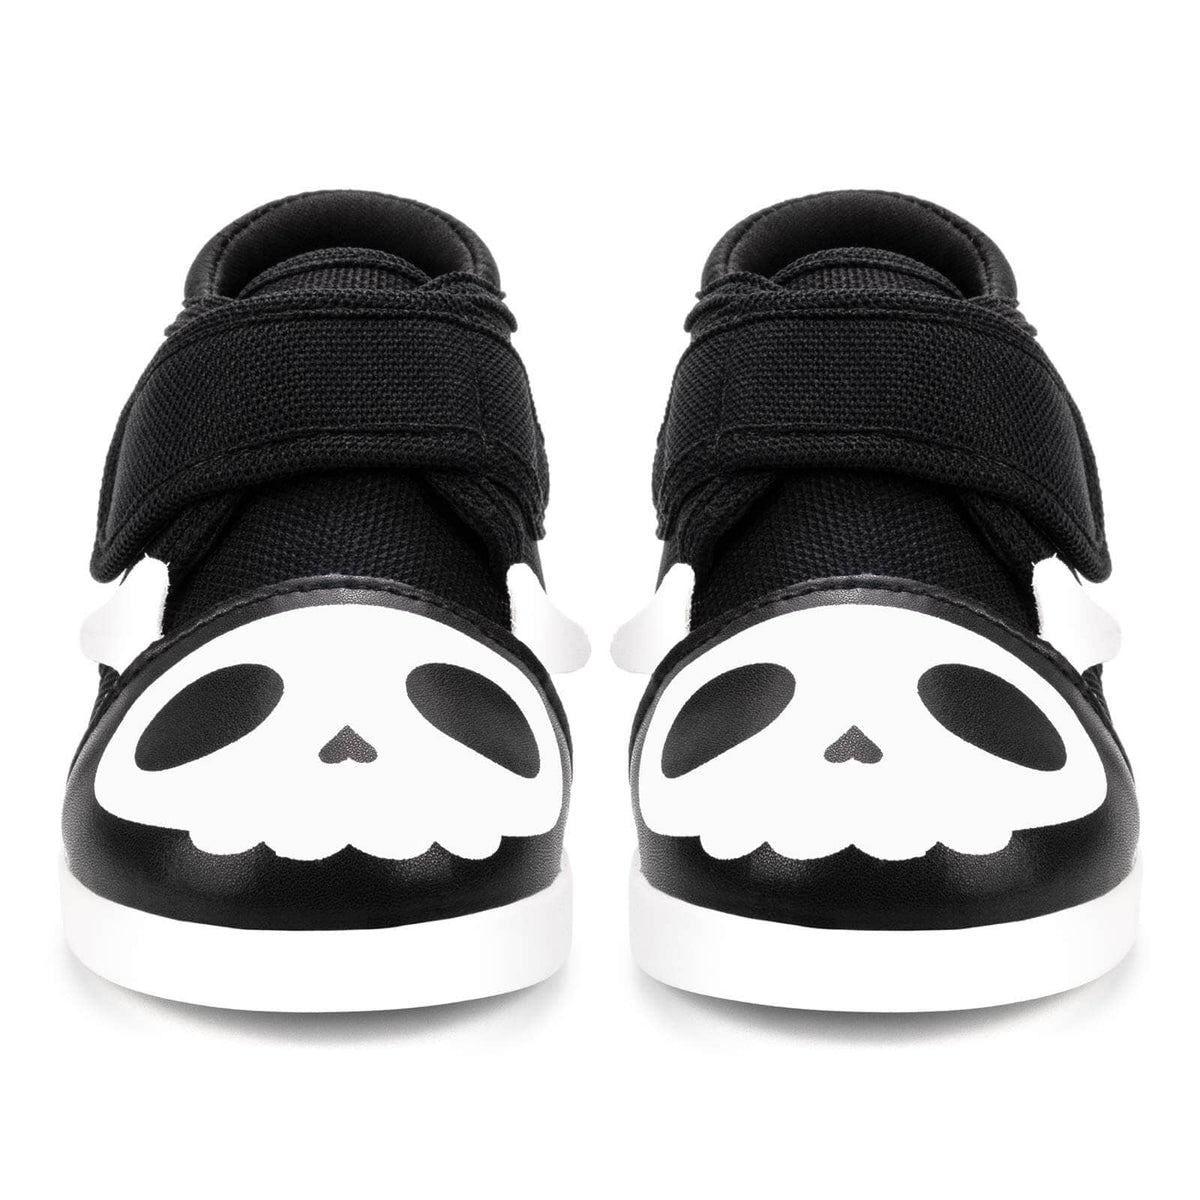 Skull & Crossbones Pirate Squeaky Toddler Shoes | Black/White